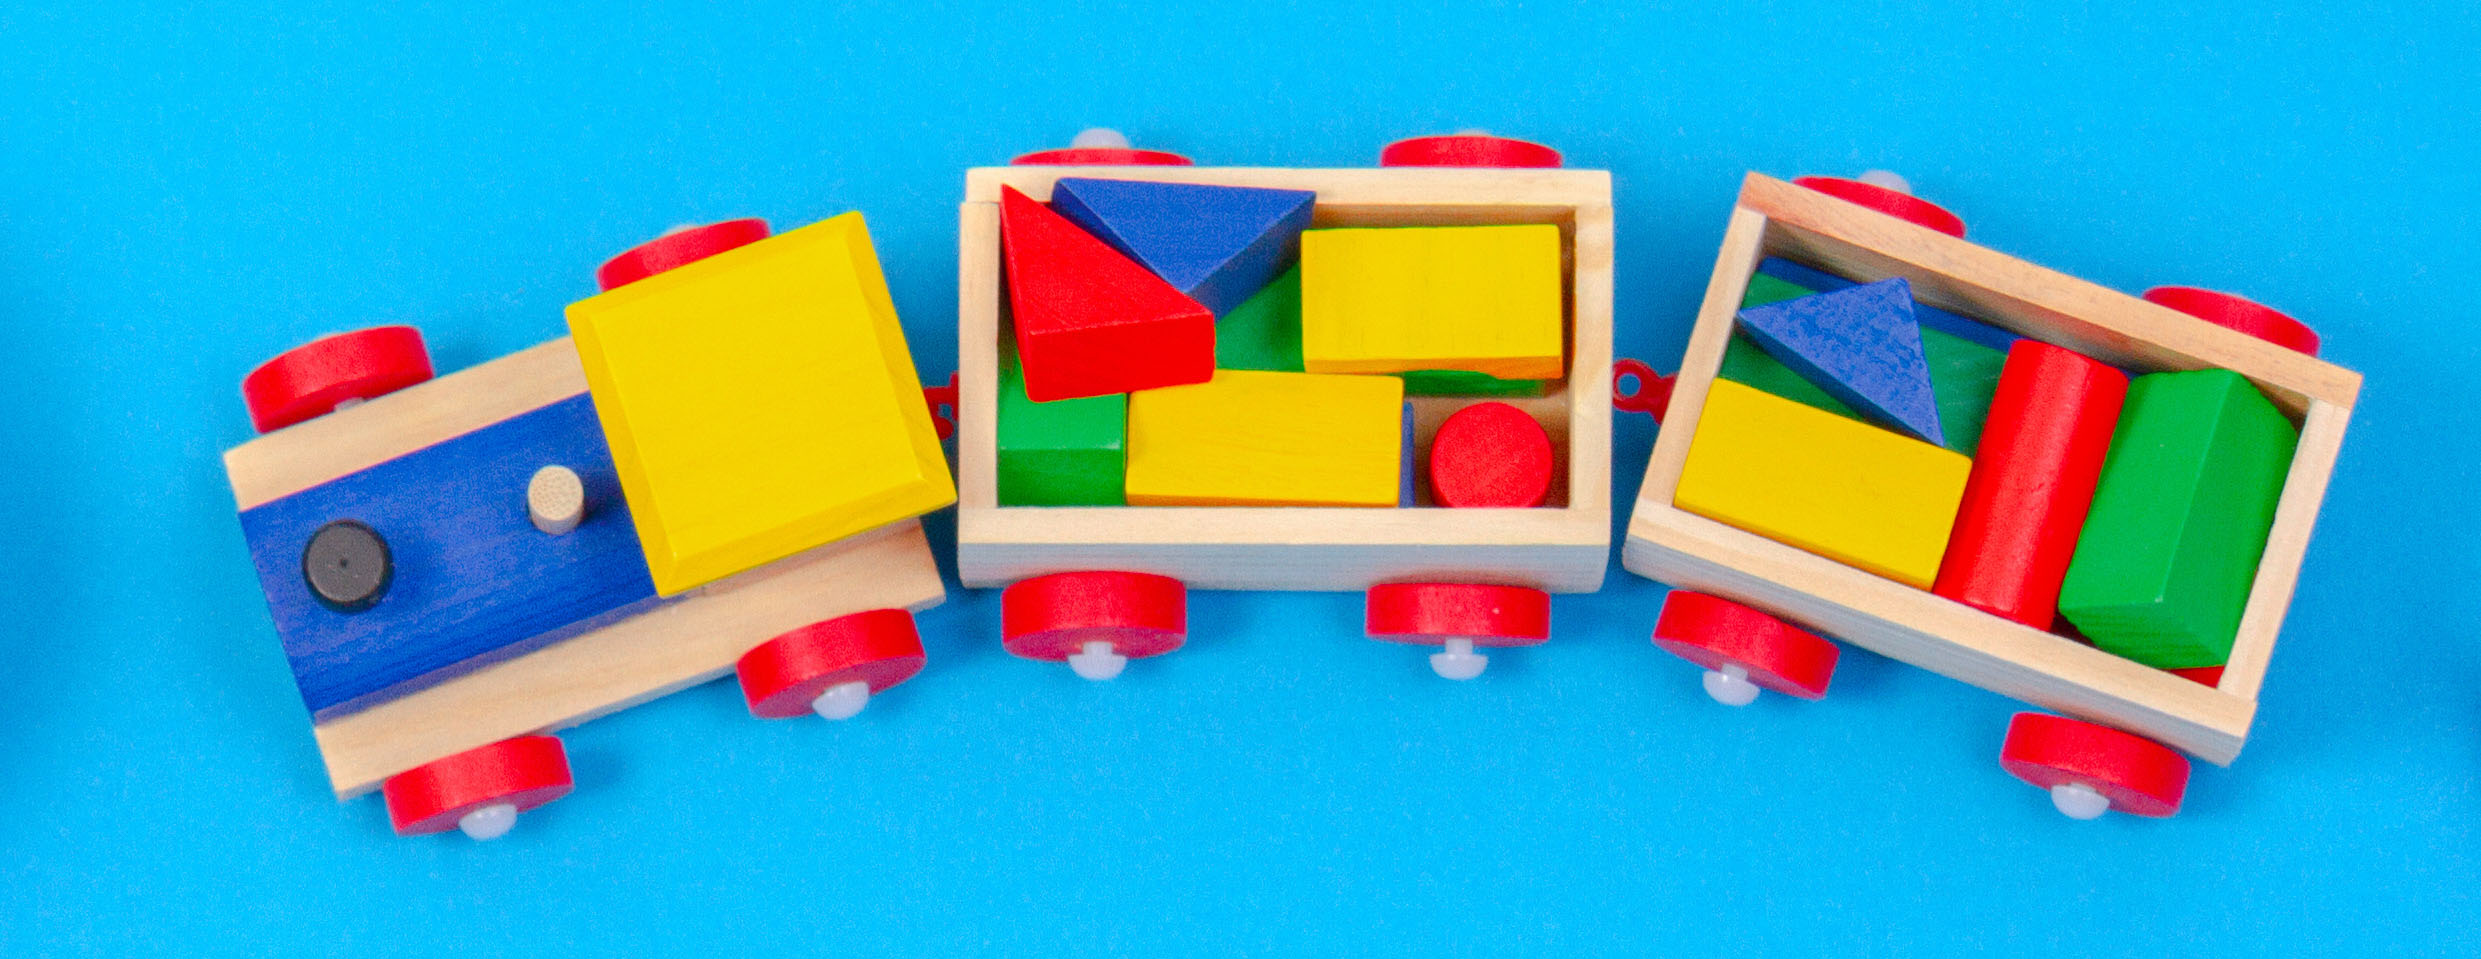 toy train and blocks